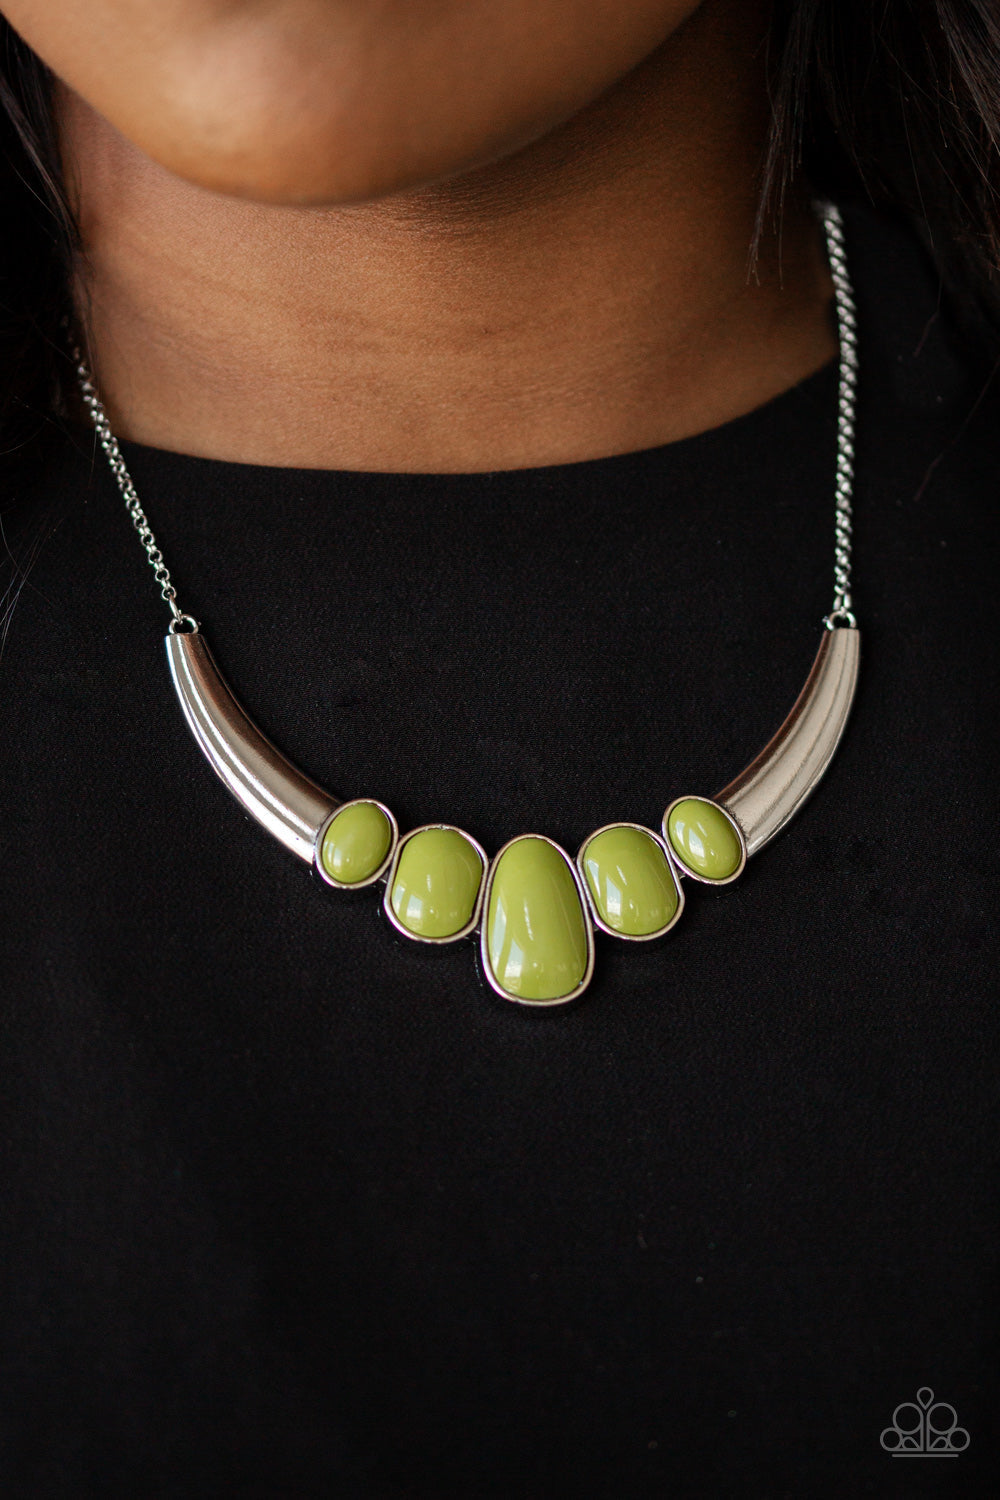 Paparazzi A BULL House - Green Beads - Silver Statement Necklace & Earrings - $5 Jewelry With Ashley Swint